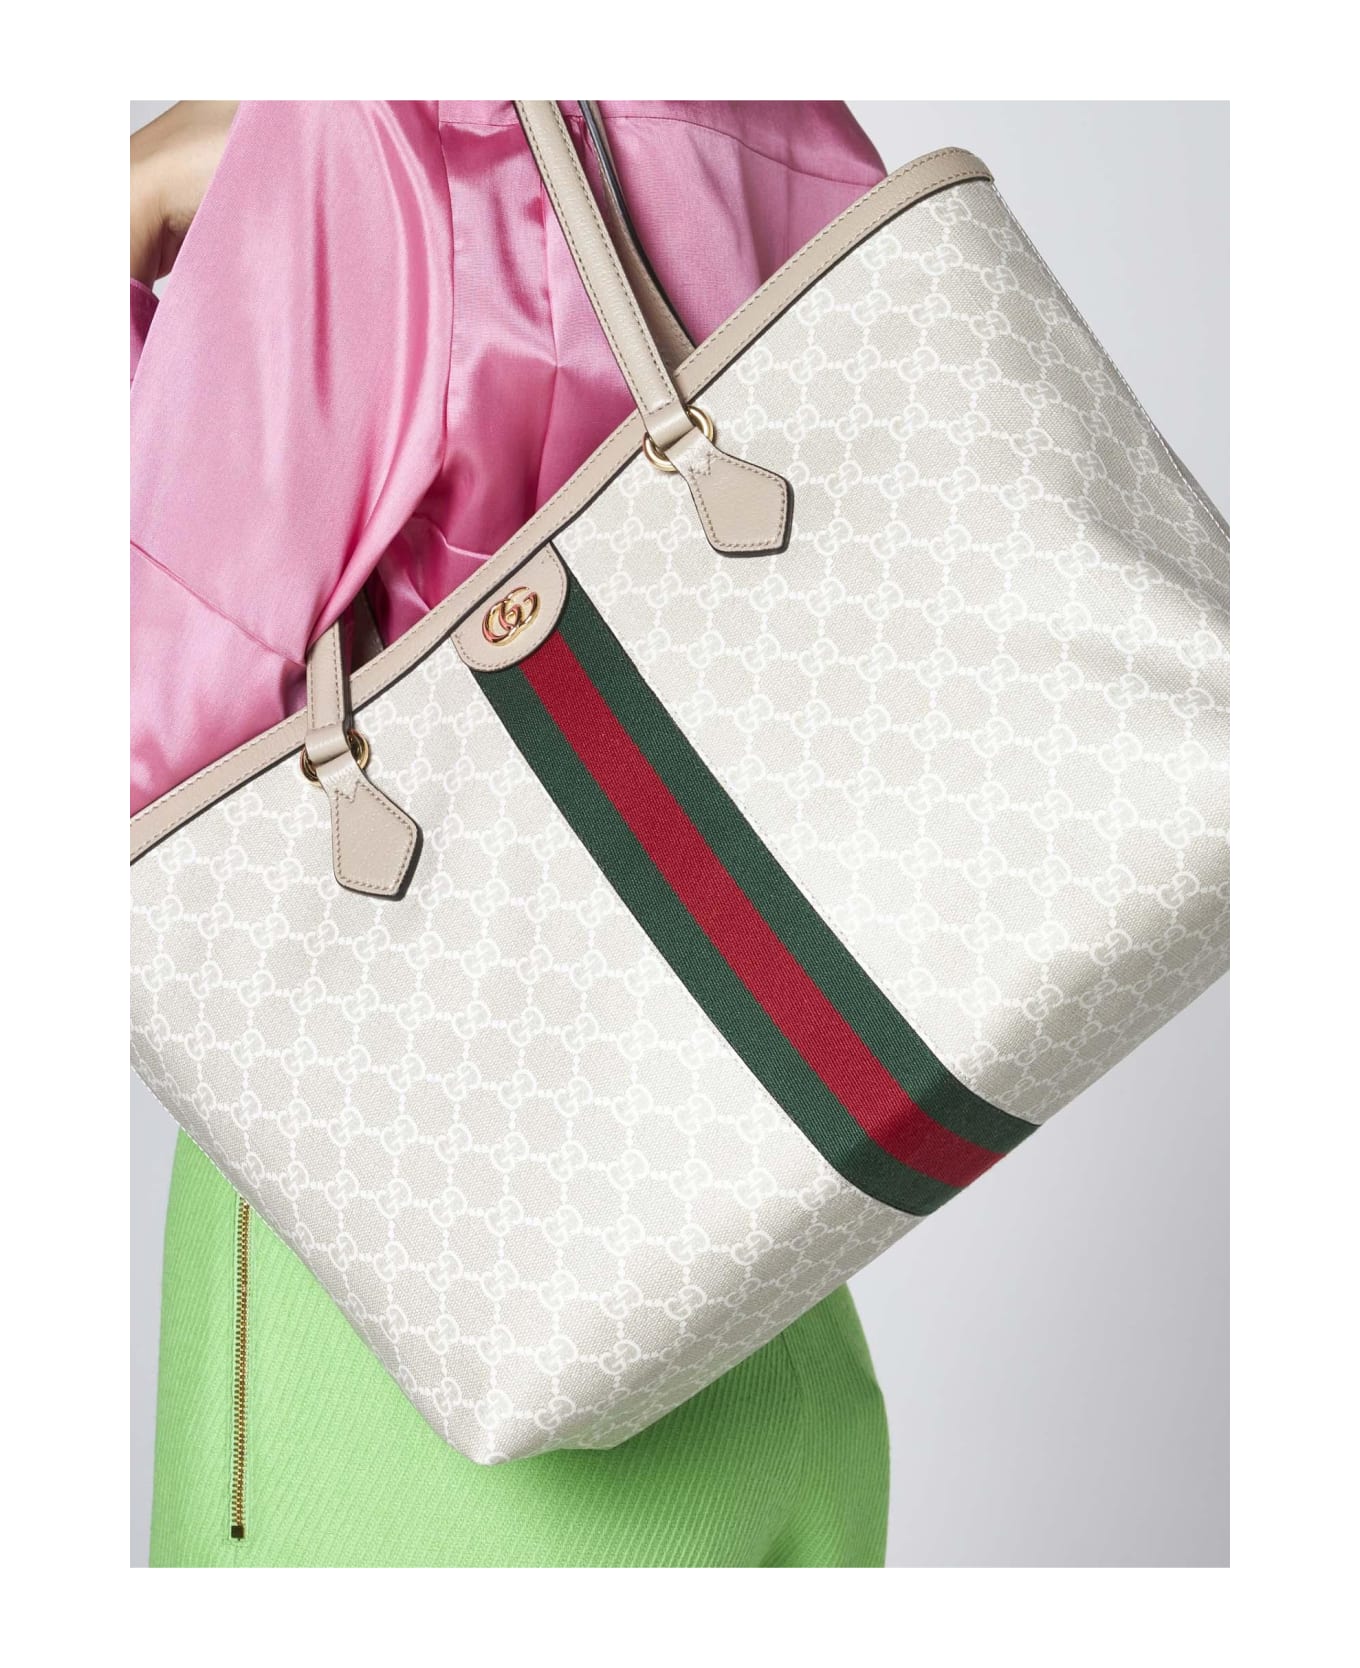 Gucci Ophidia Gg Canvas Medium Tote Bag - Beige/white トートバッグ